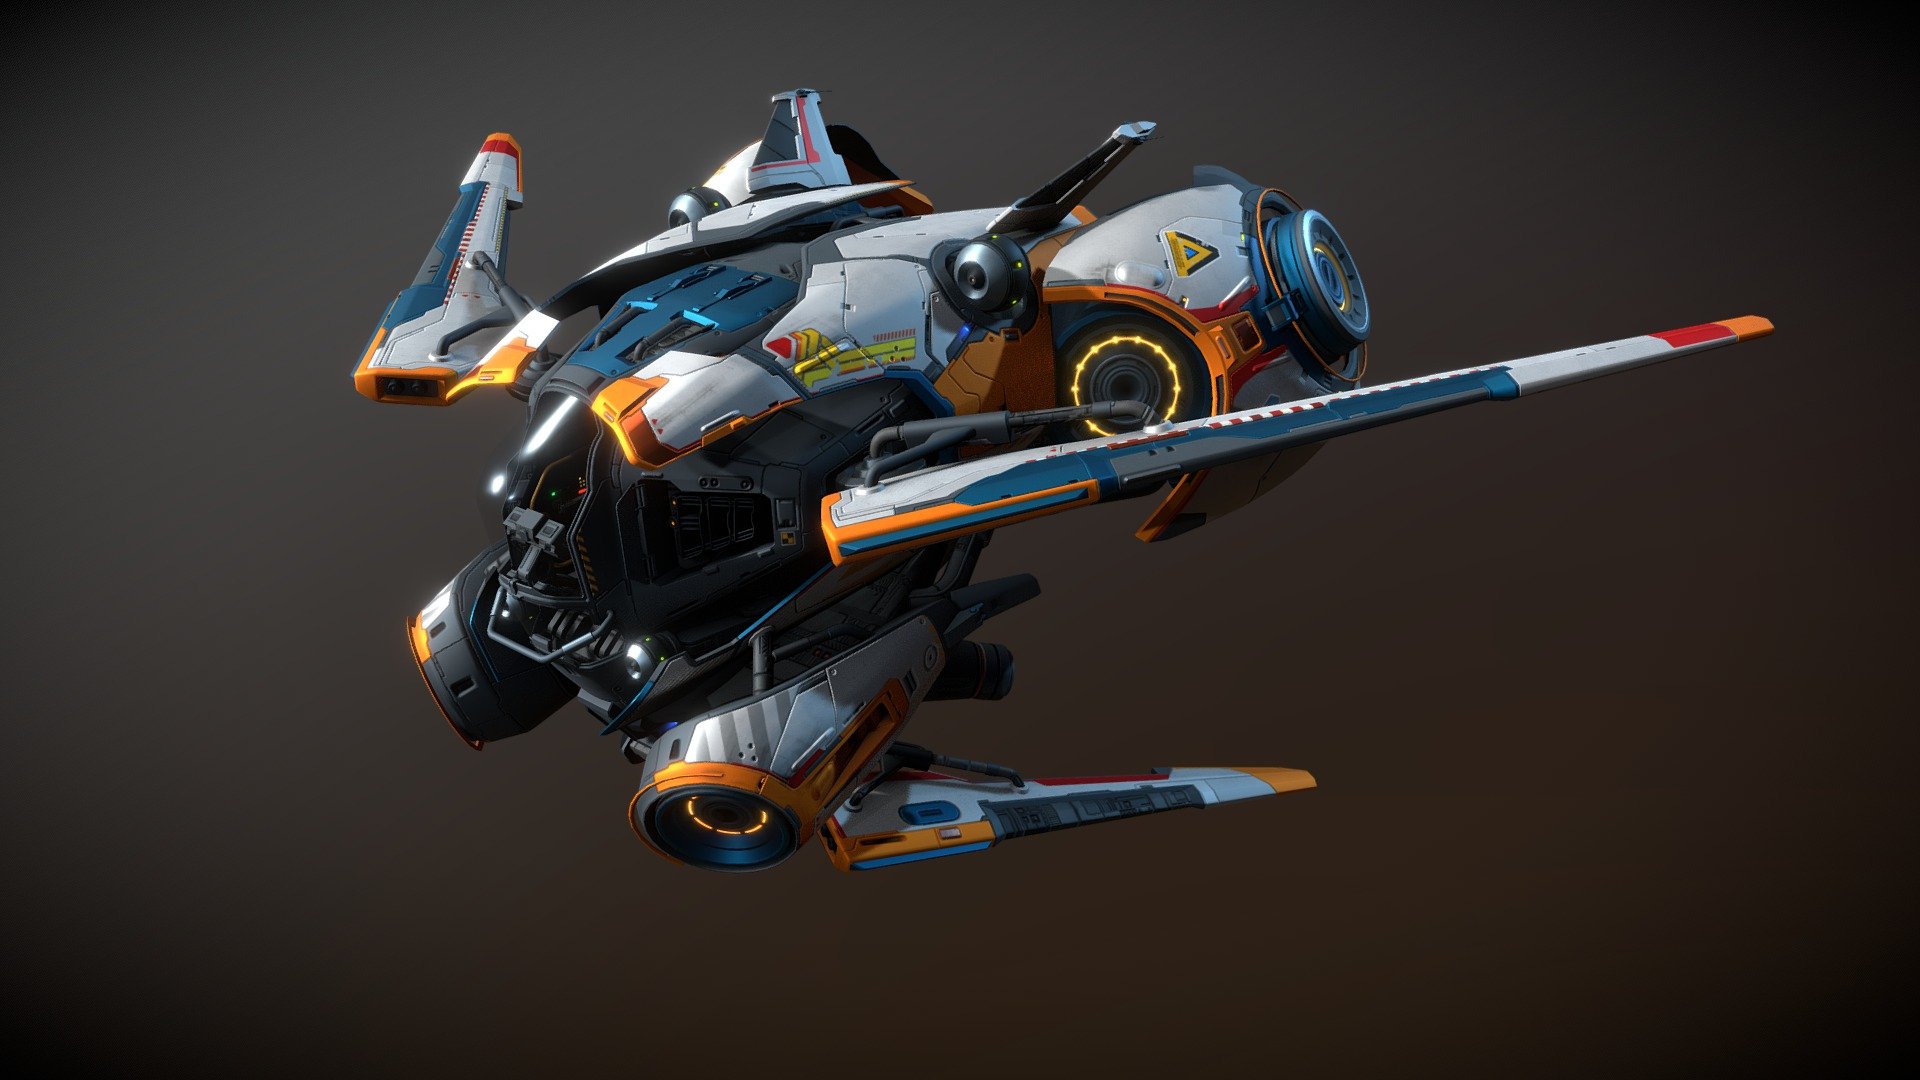 This Original package contains one SCAVENGER - Fighter. This design is my own concept, does not repeat any existing work. You can use it without a doubt about copyright 3d model